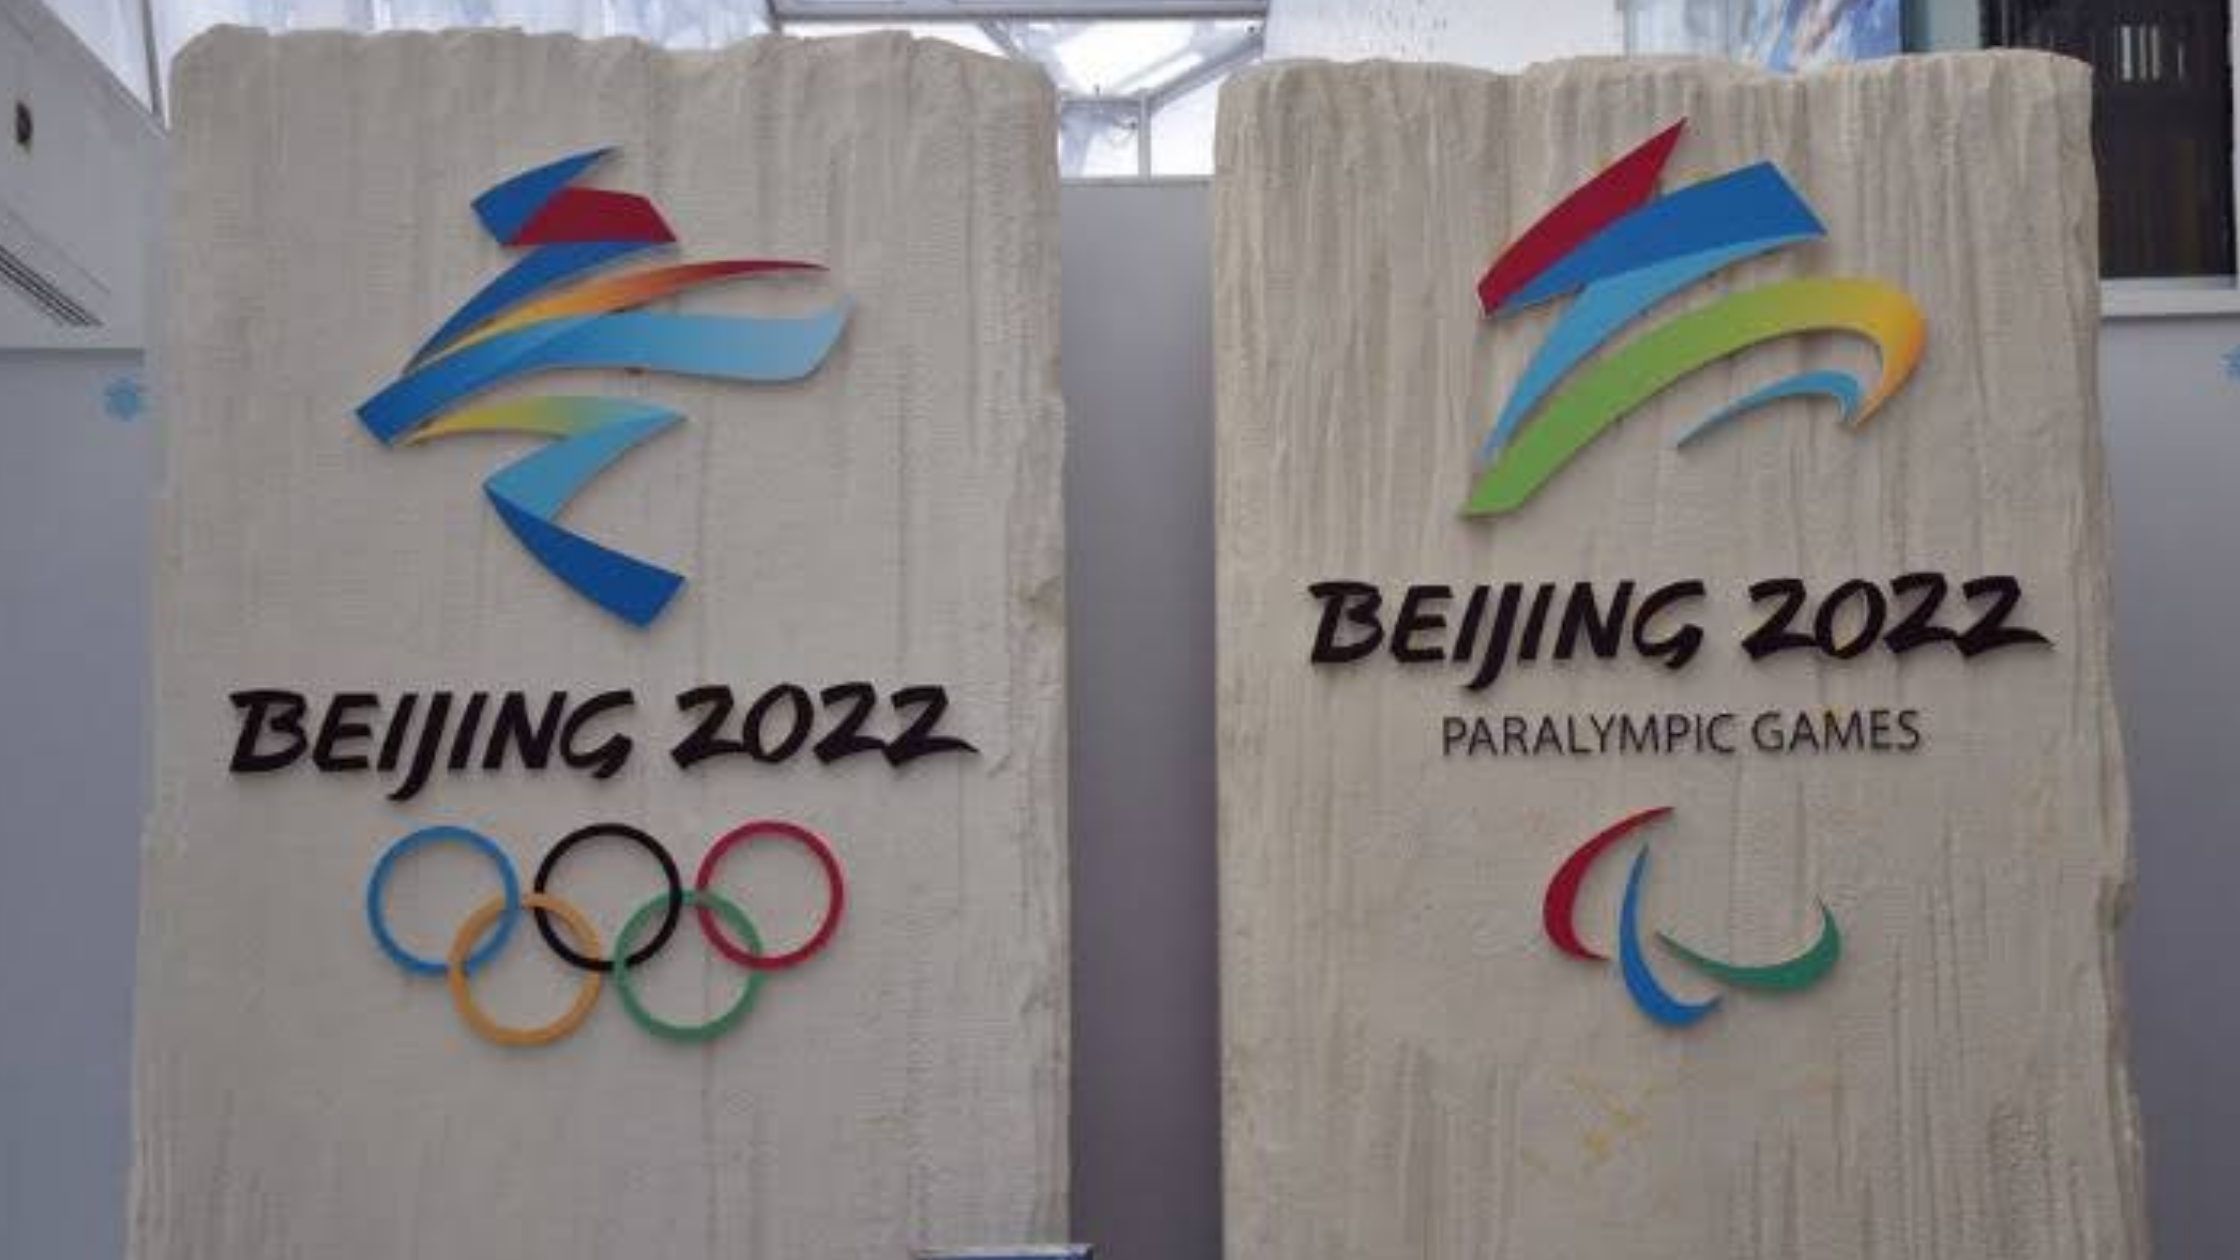 China Digital Currency and Beijing Olympics 2020